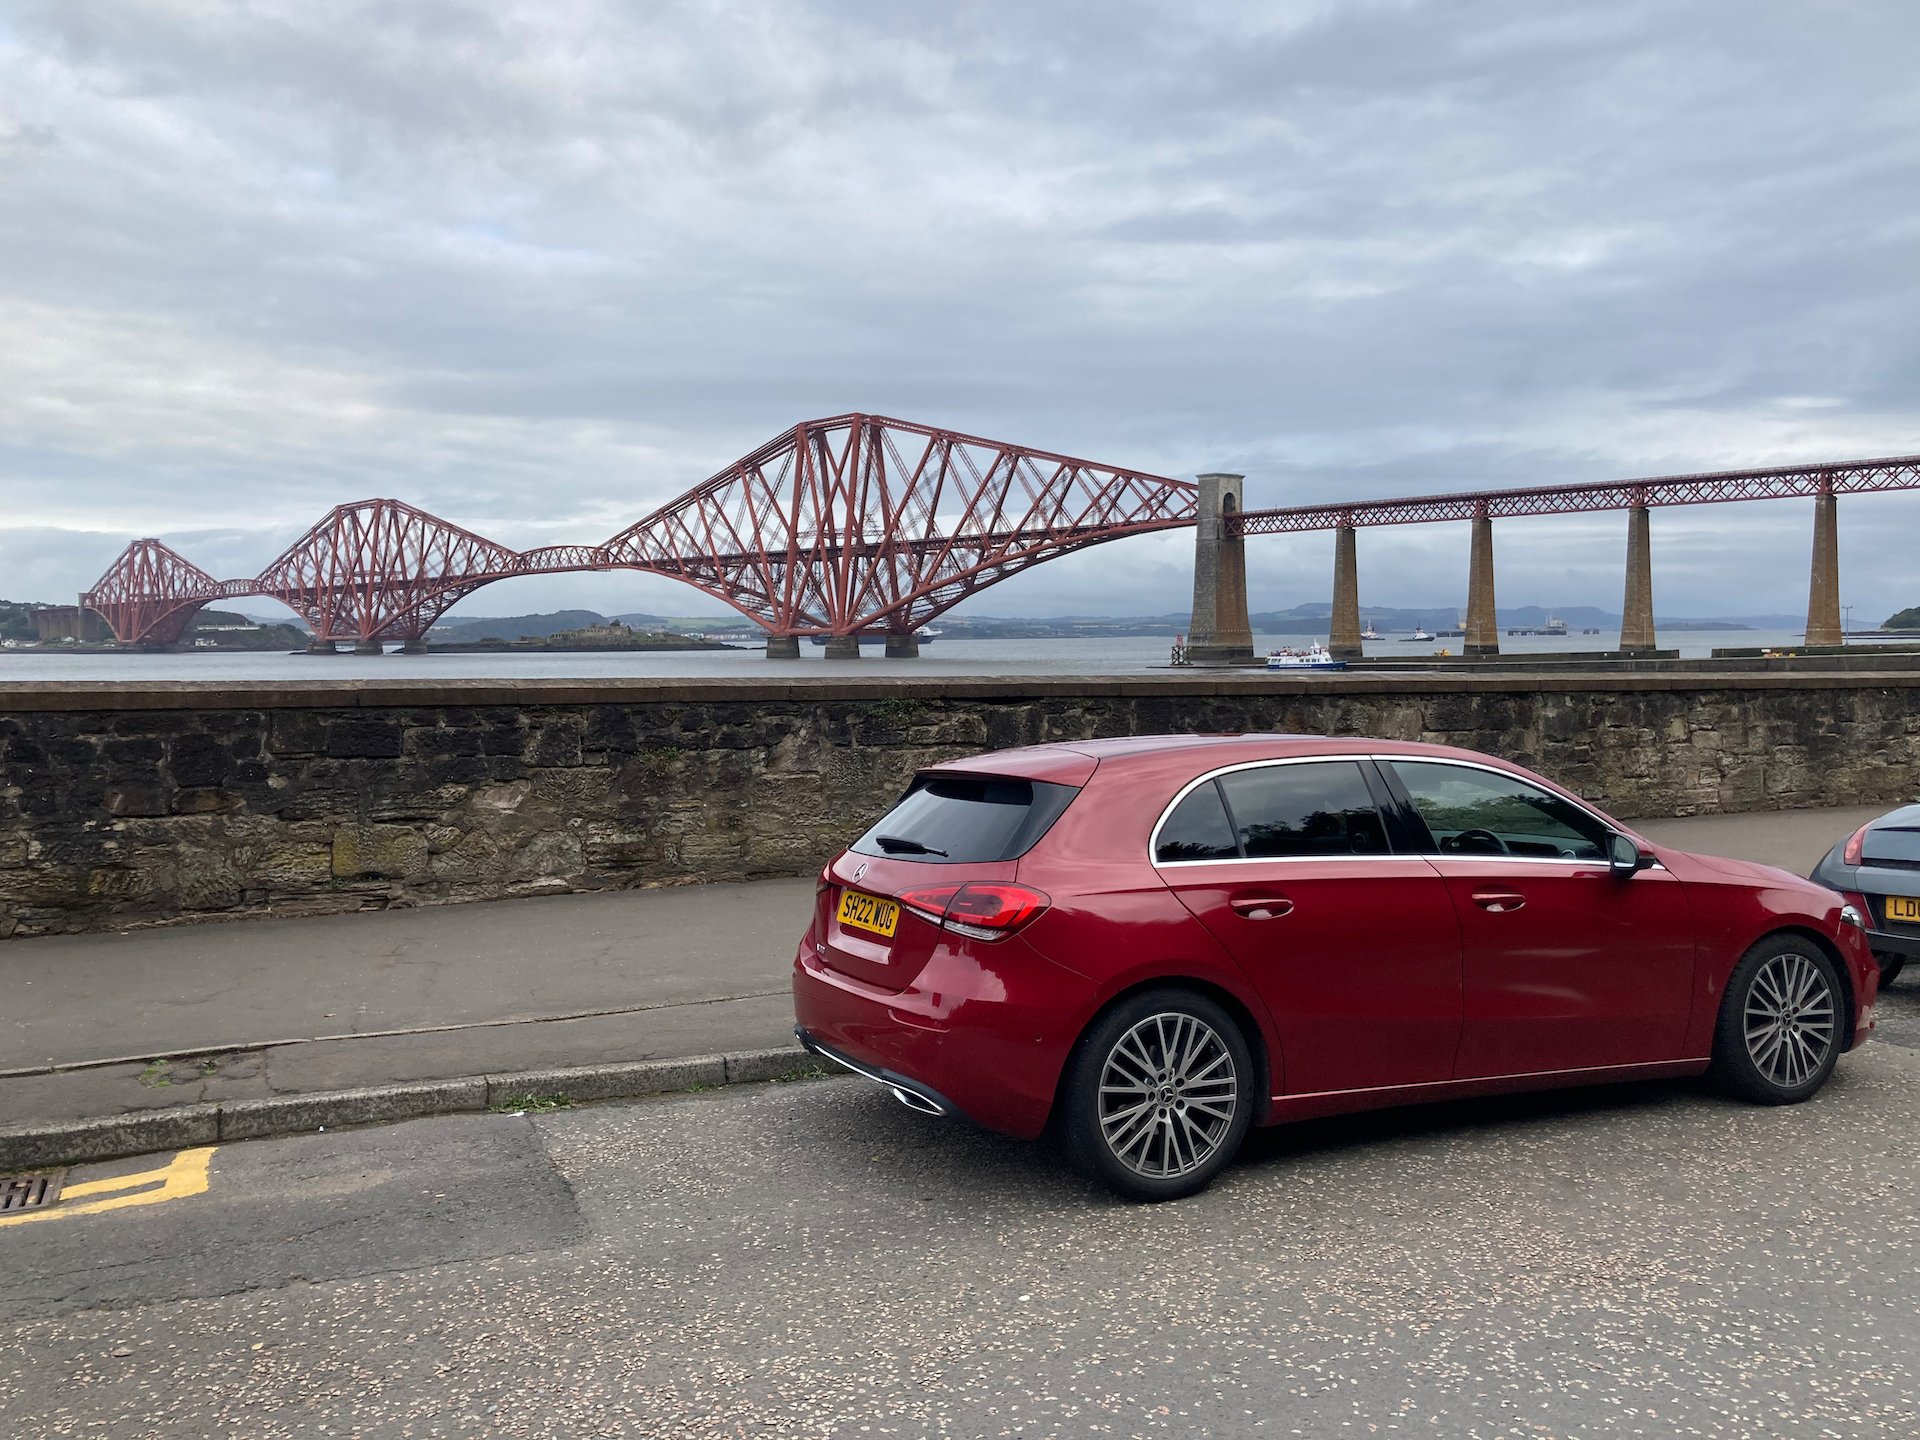  Car selfie with the Forth Bridge. 